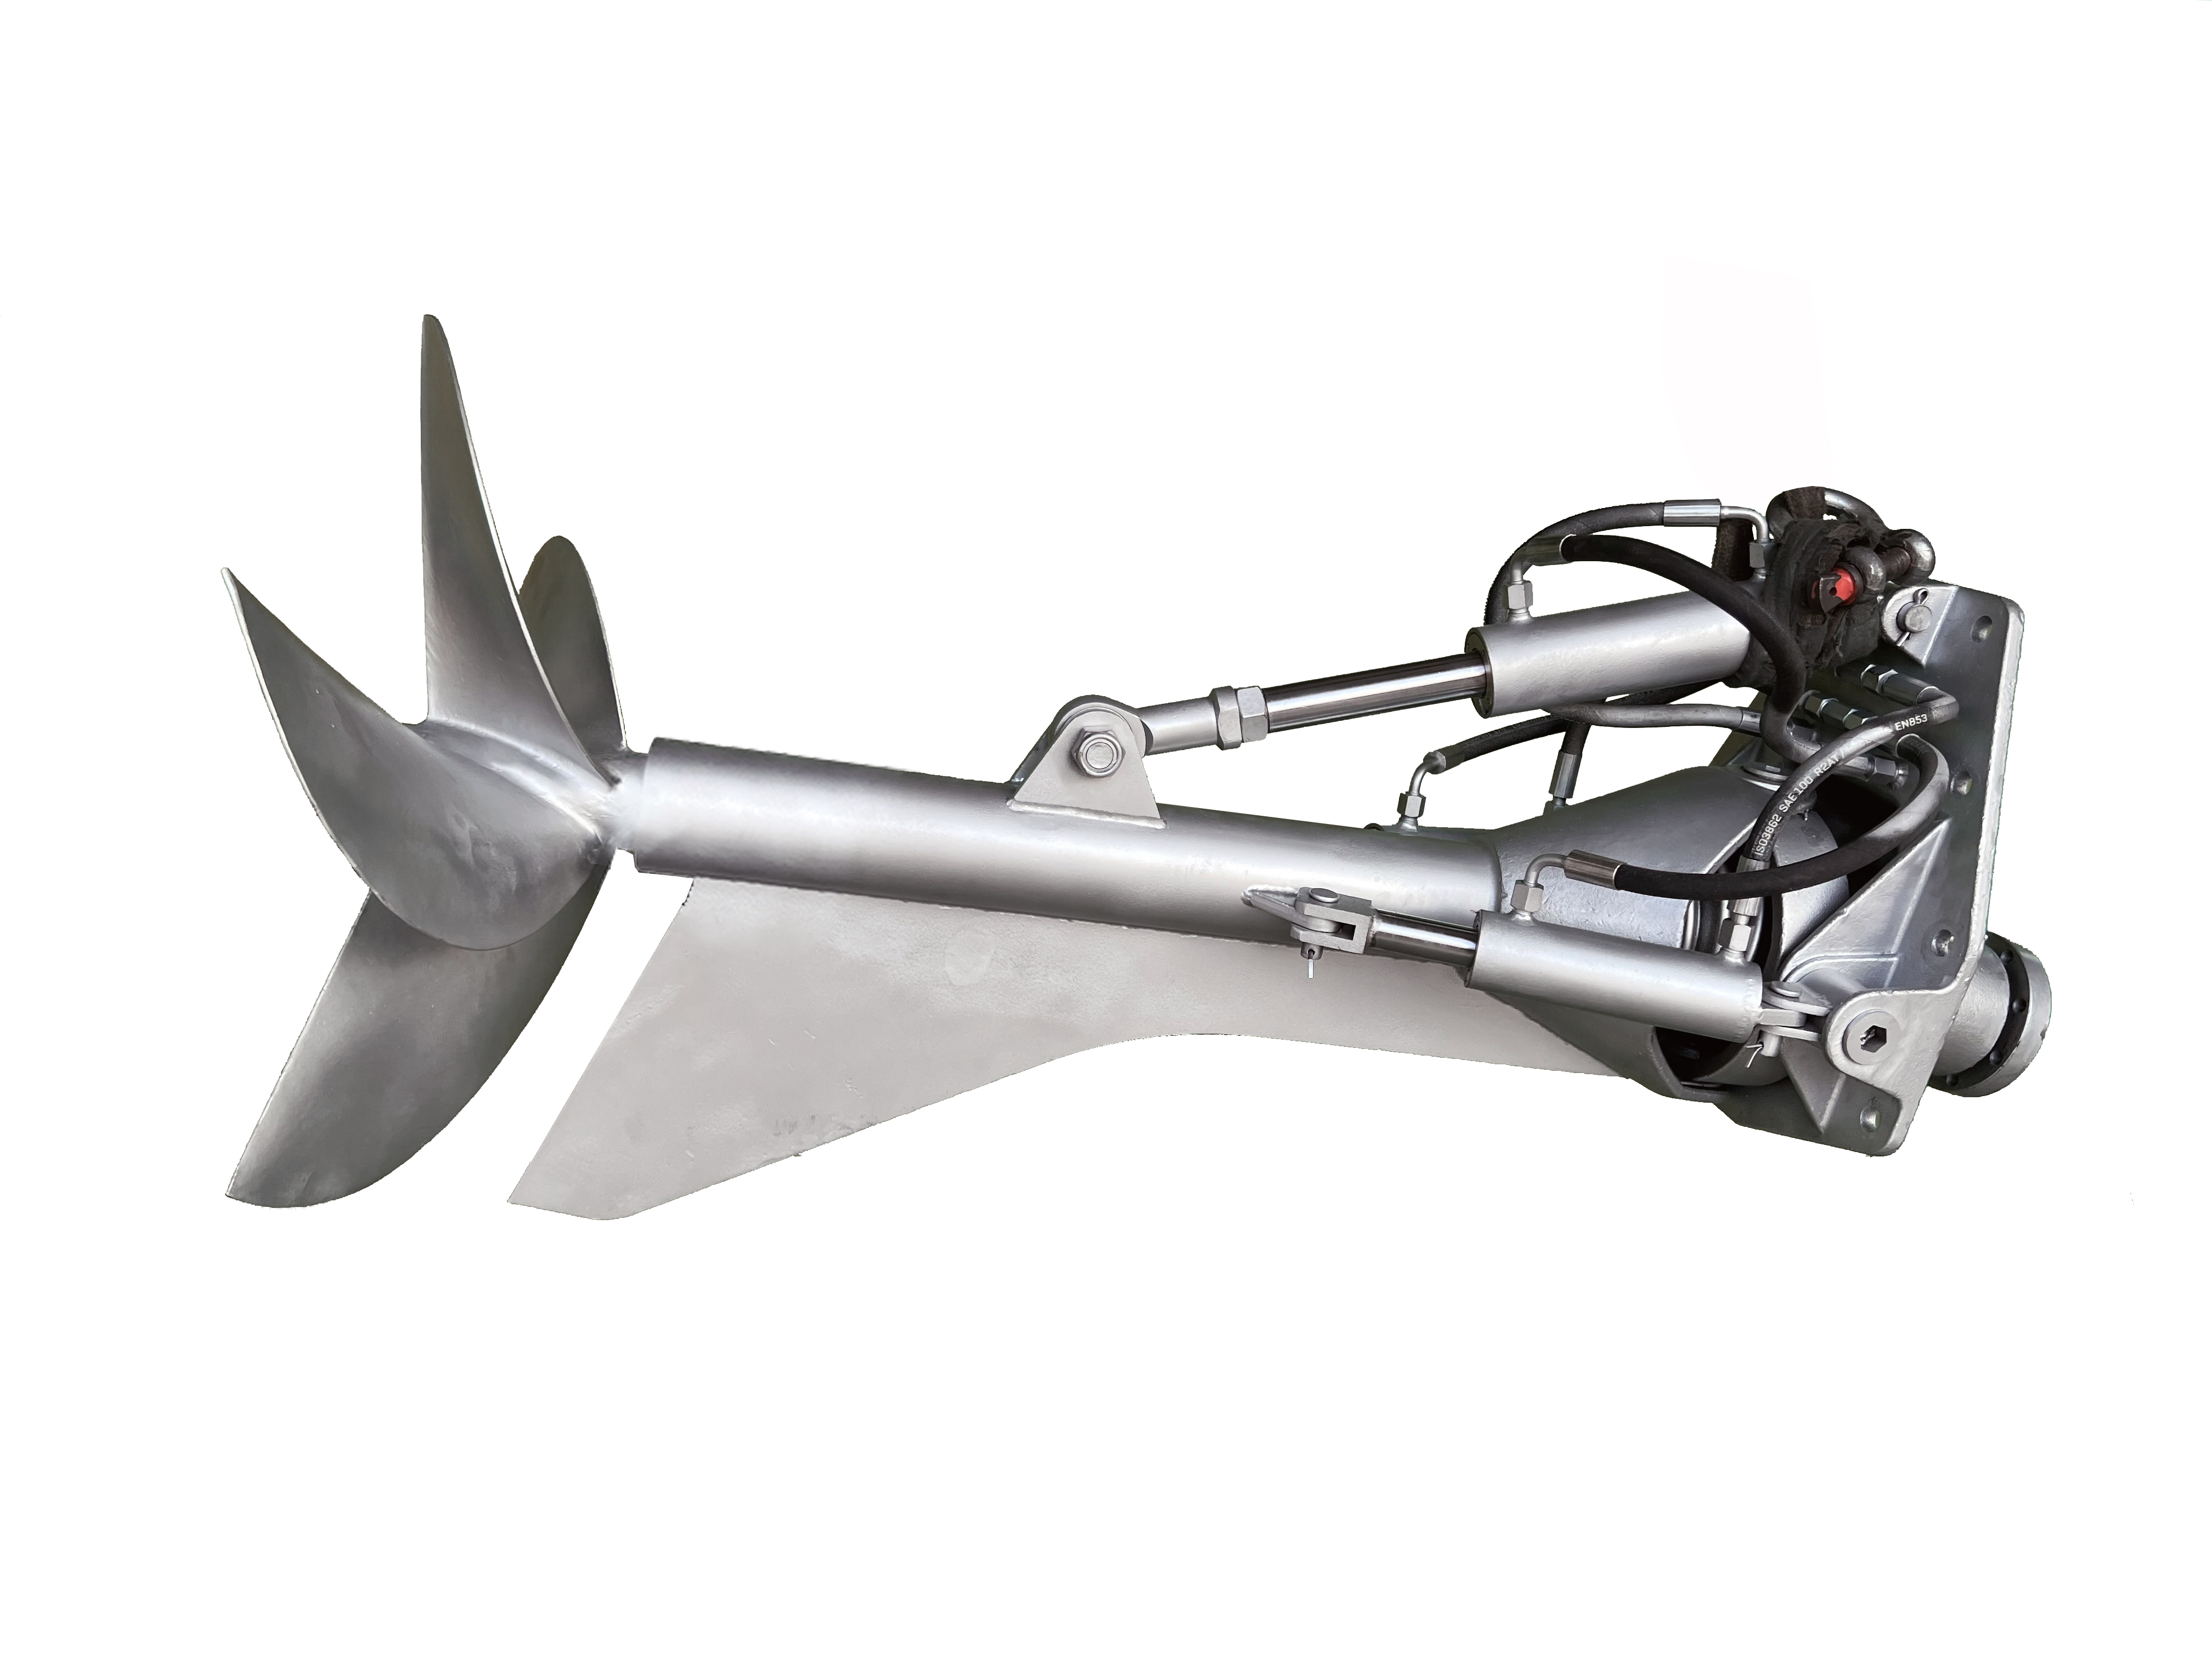 BH750 Marine Boat Surface Drive Propeller 5 Blades Movable Pitch With Diesel Engine